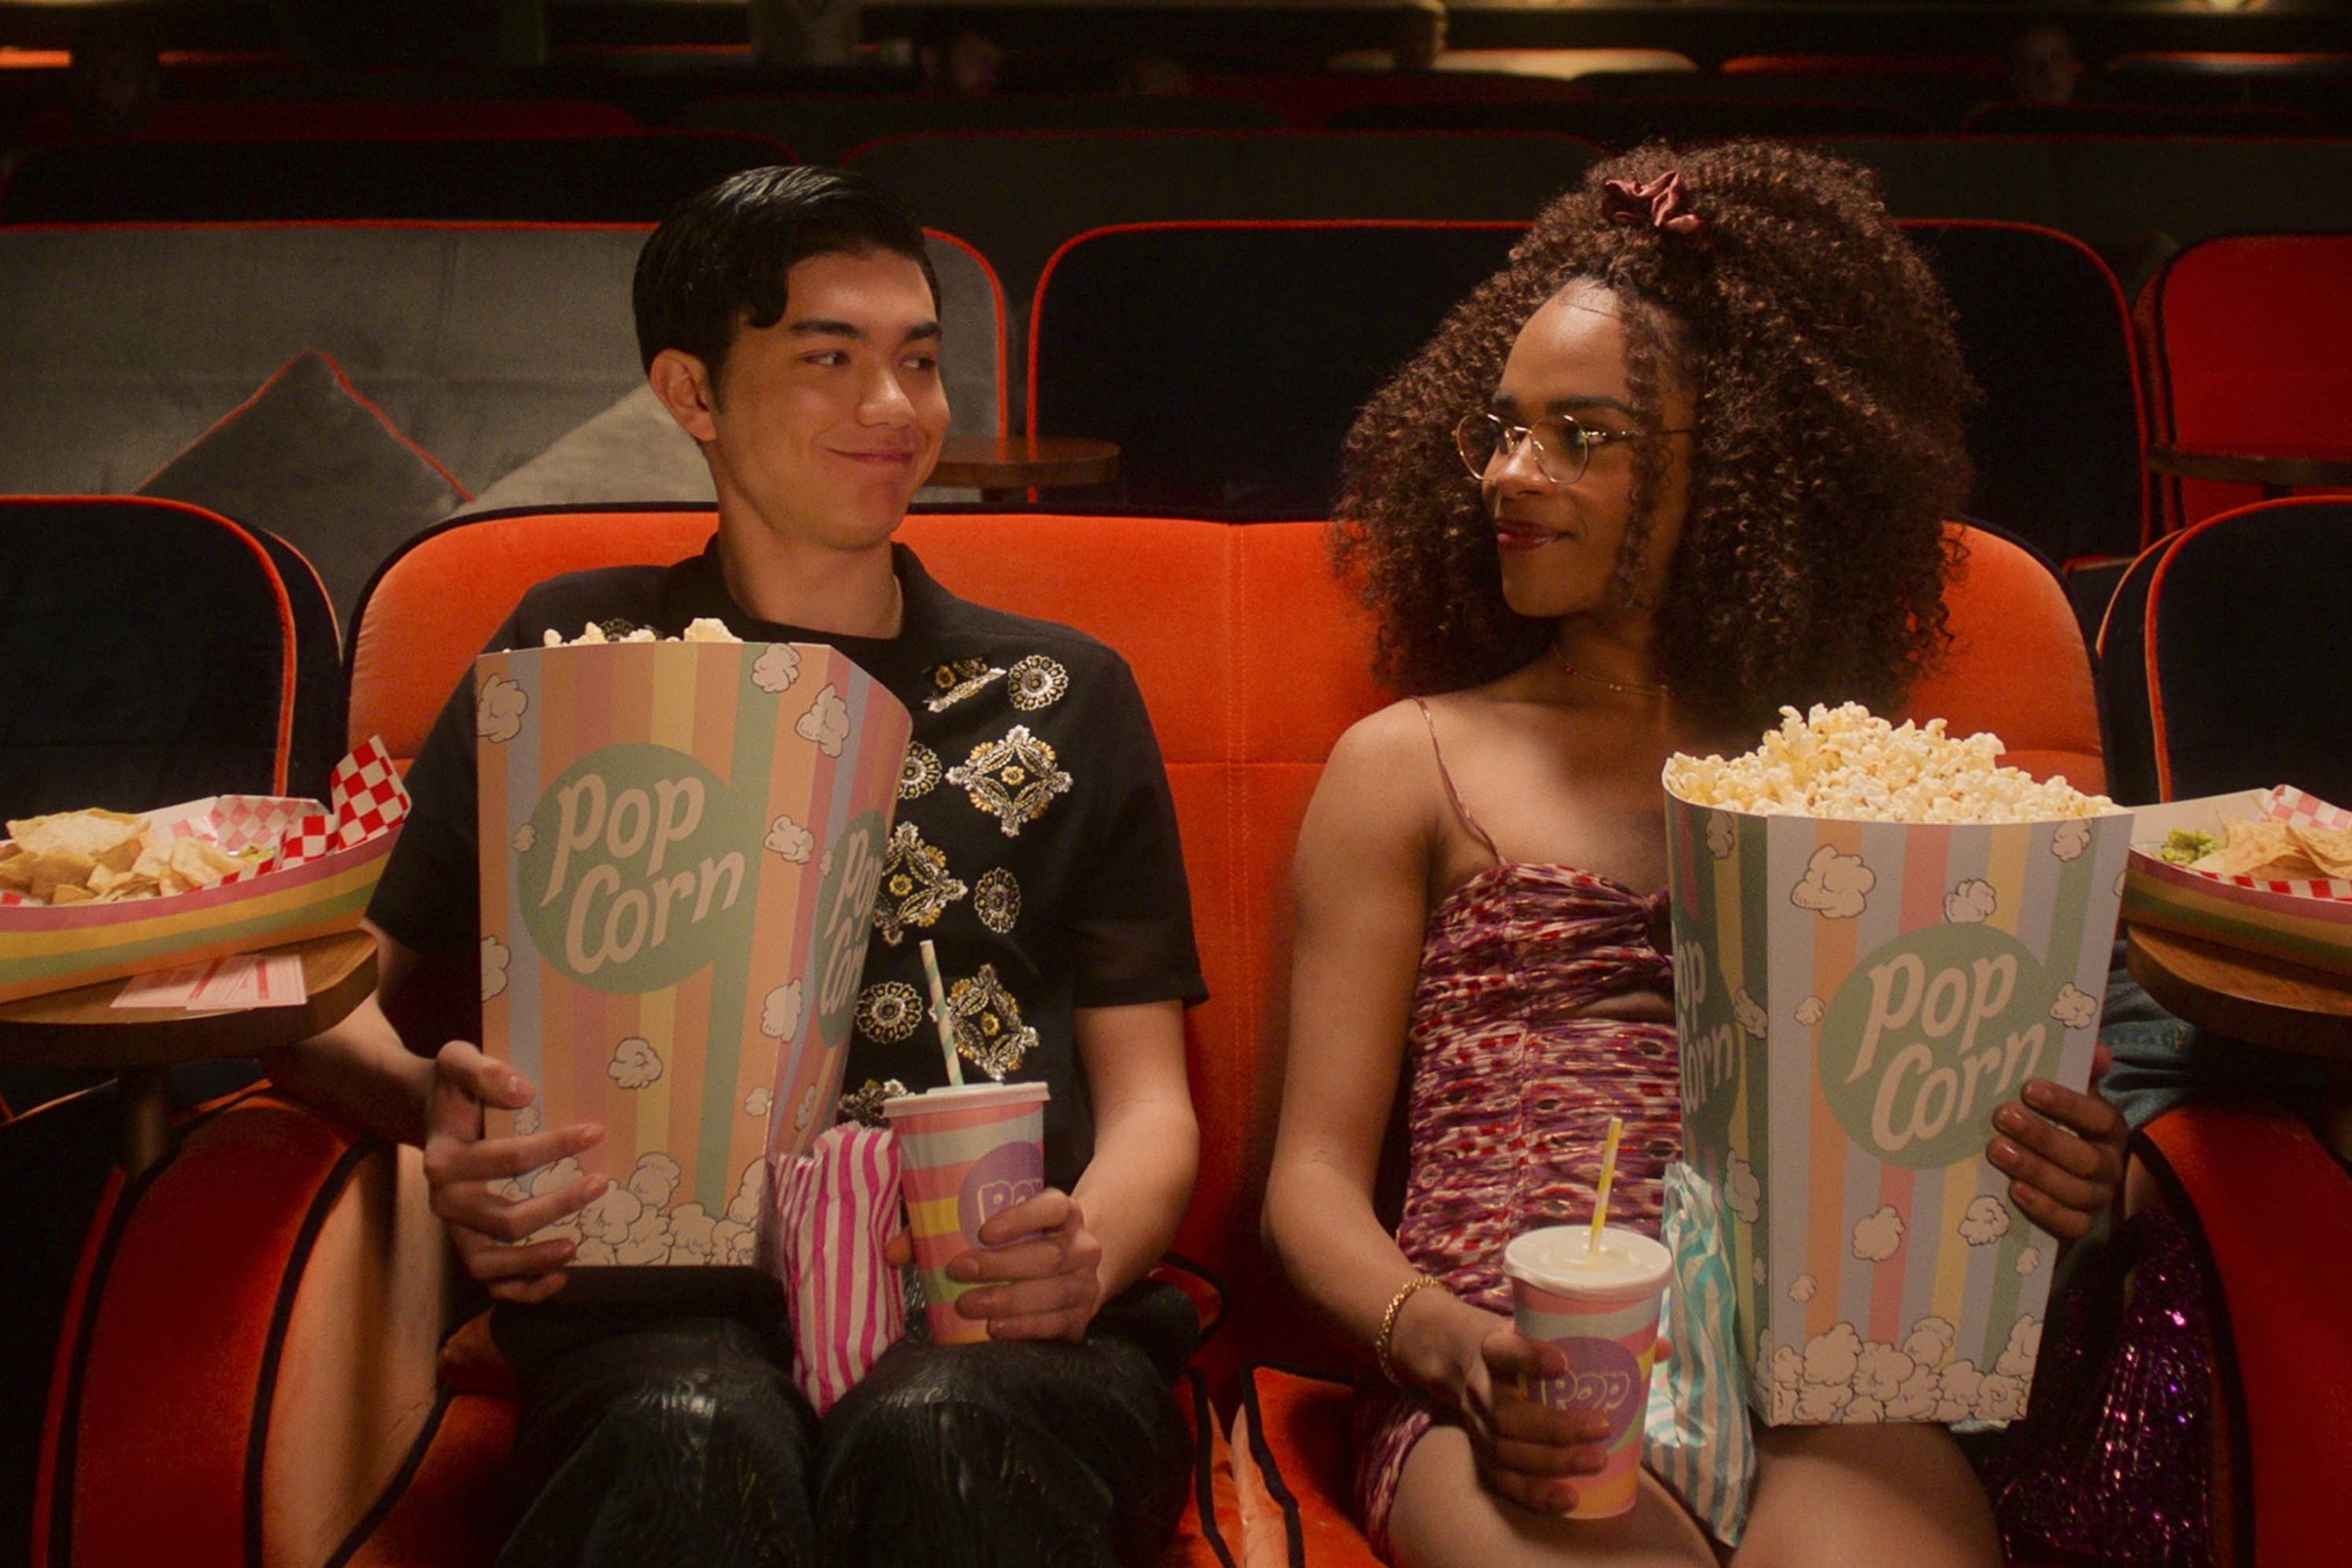 Will Gao and Yasmin Finney sit in a movie theater holding popcorn and drinks, smiling at each other